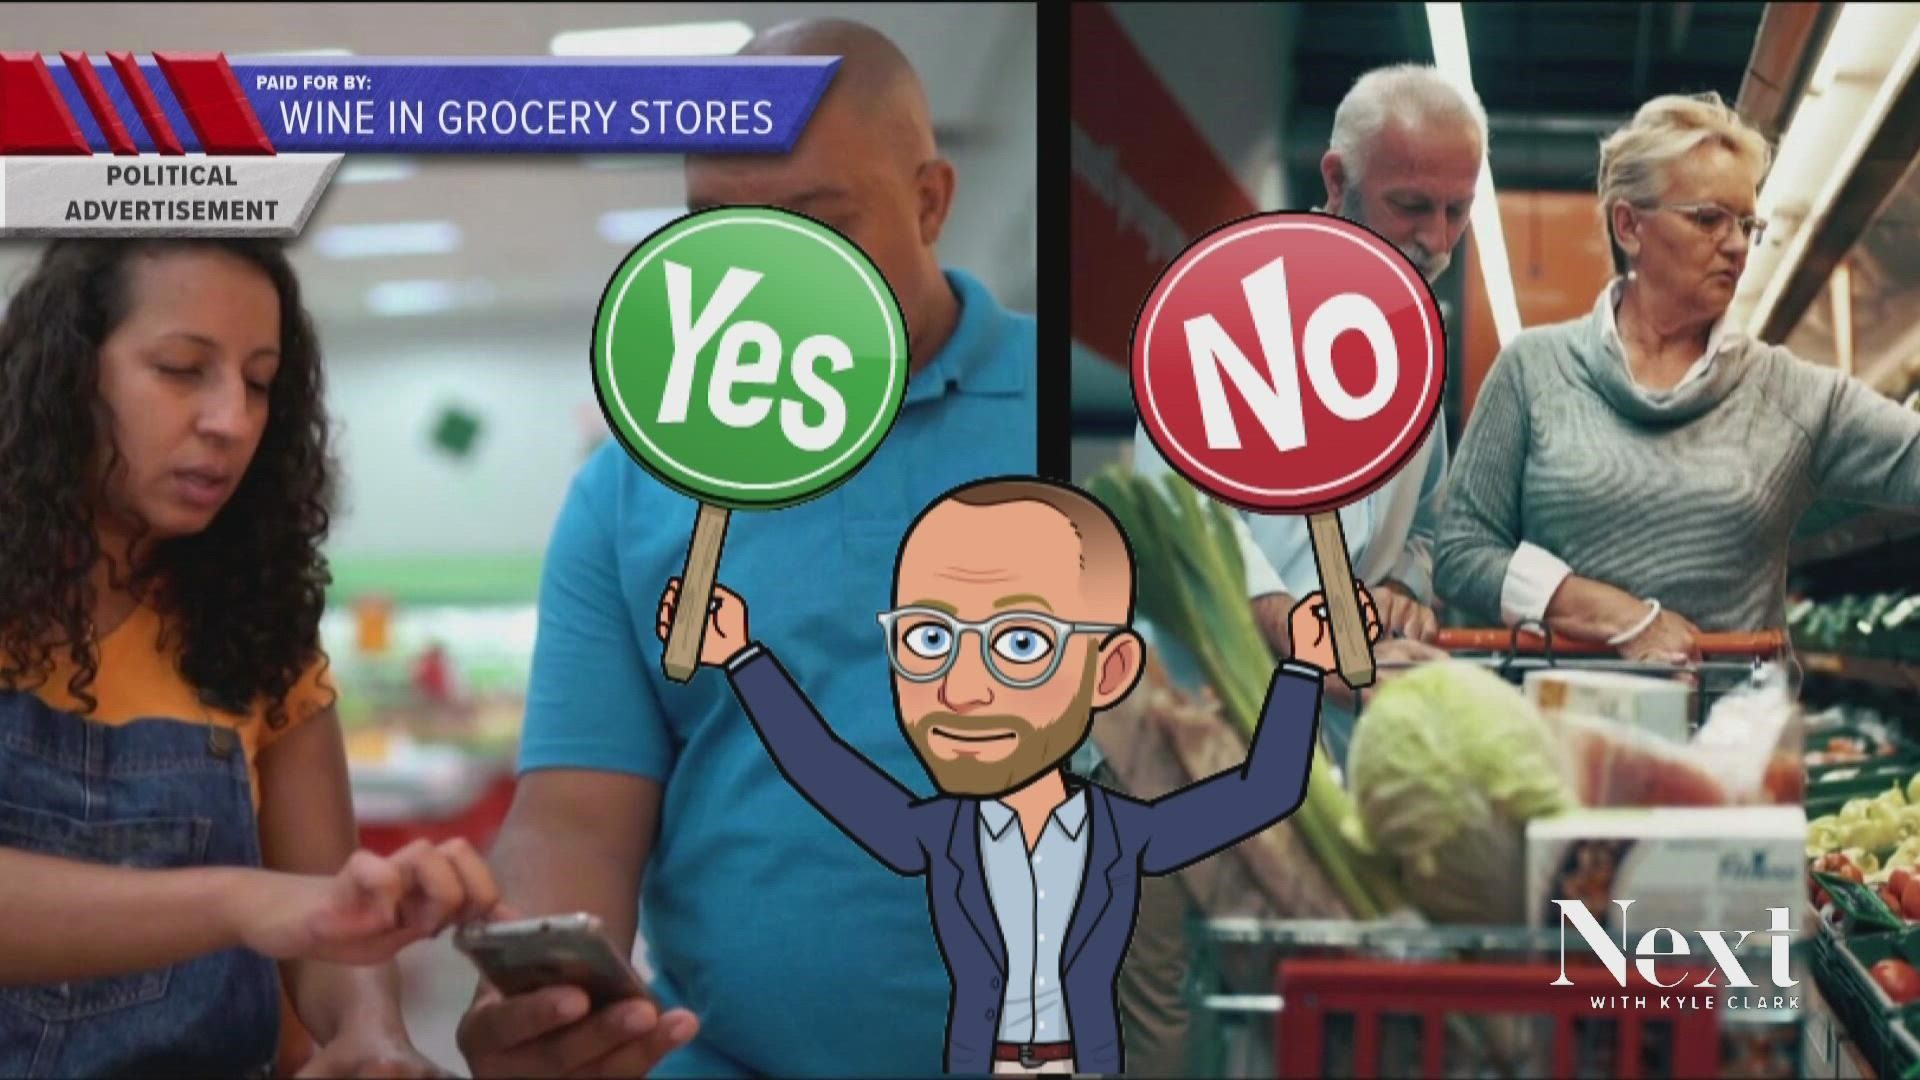 Proposition 125 asks you to let grocery stores sell wine, which is currently limited to liquor stores.
Proposition 126 would let delivery apps bring alcohol to you.